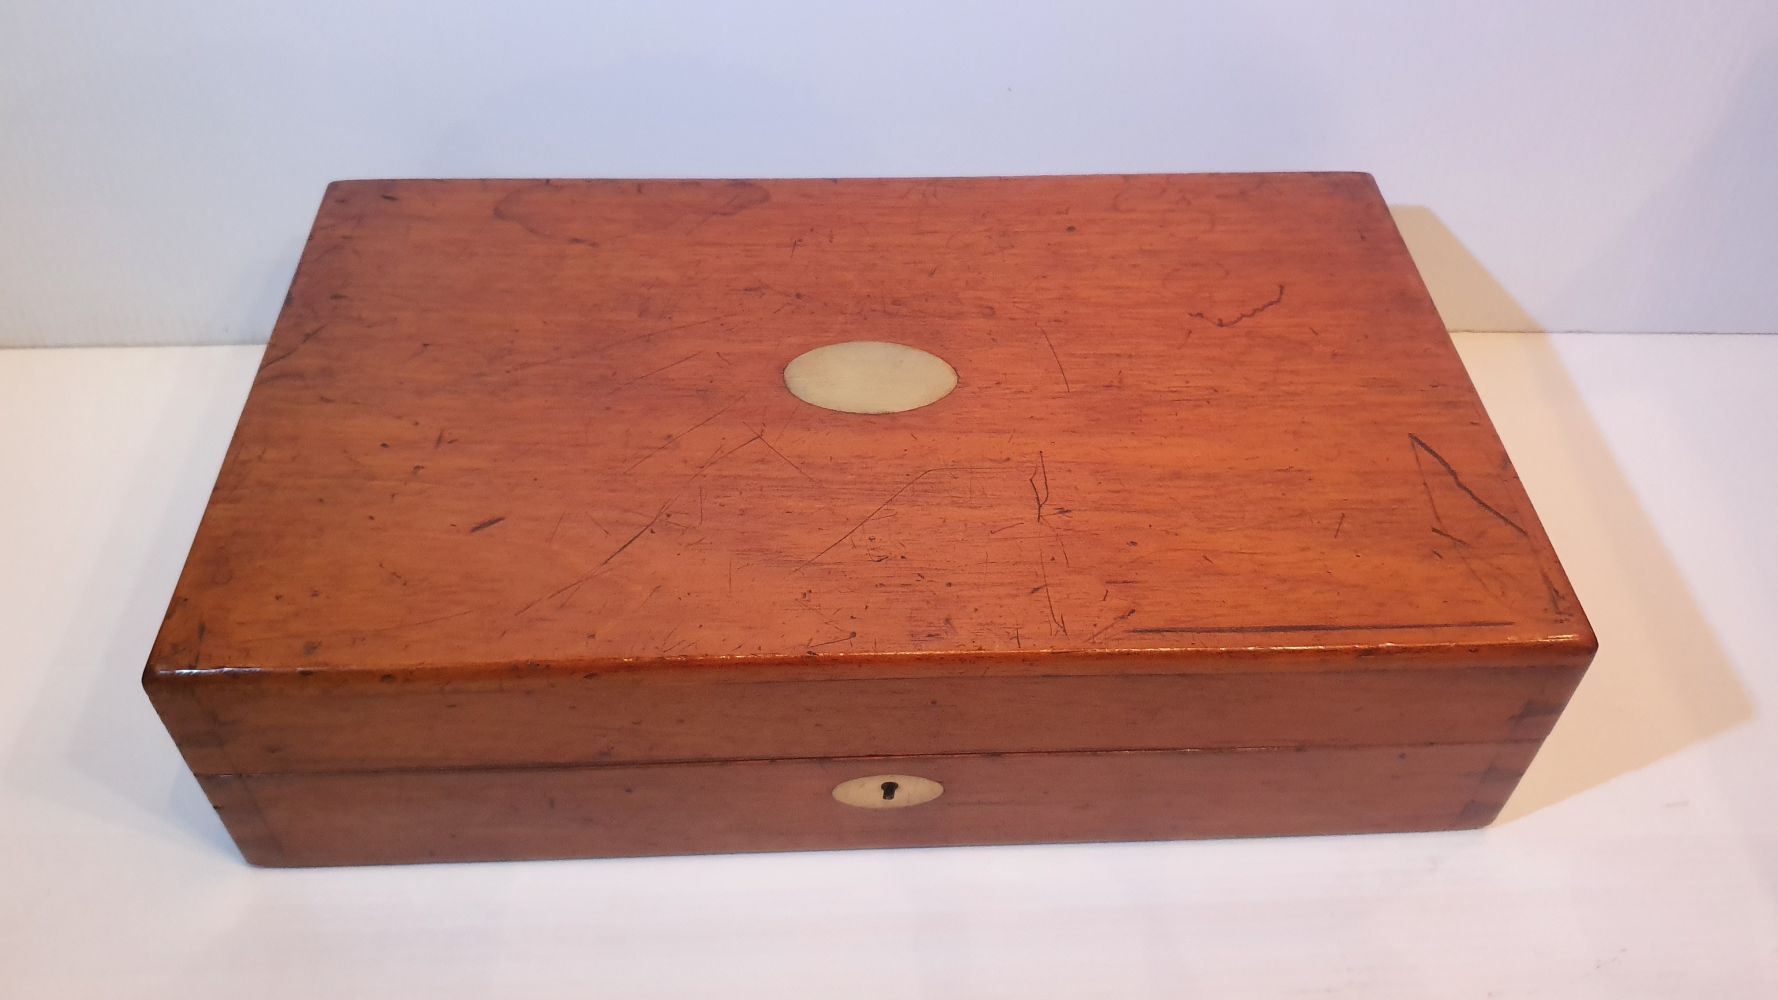 A RARE 19TH CENTURY MAHOGANY GAMES BOX, including contents, with chess, draughts, 3 board games - Image 2 of 5